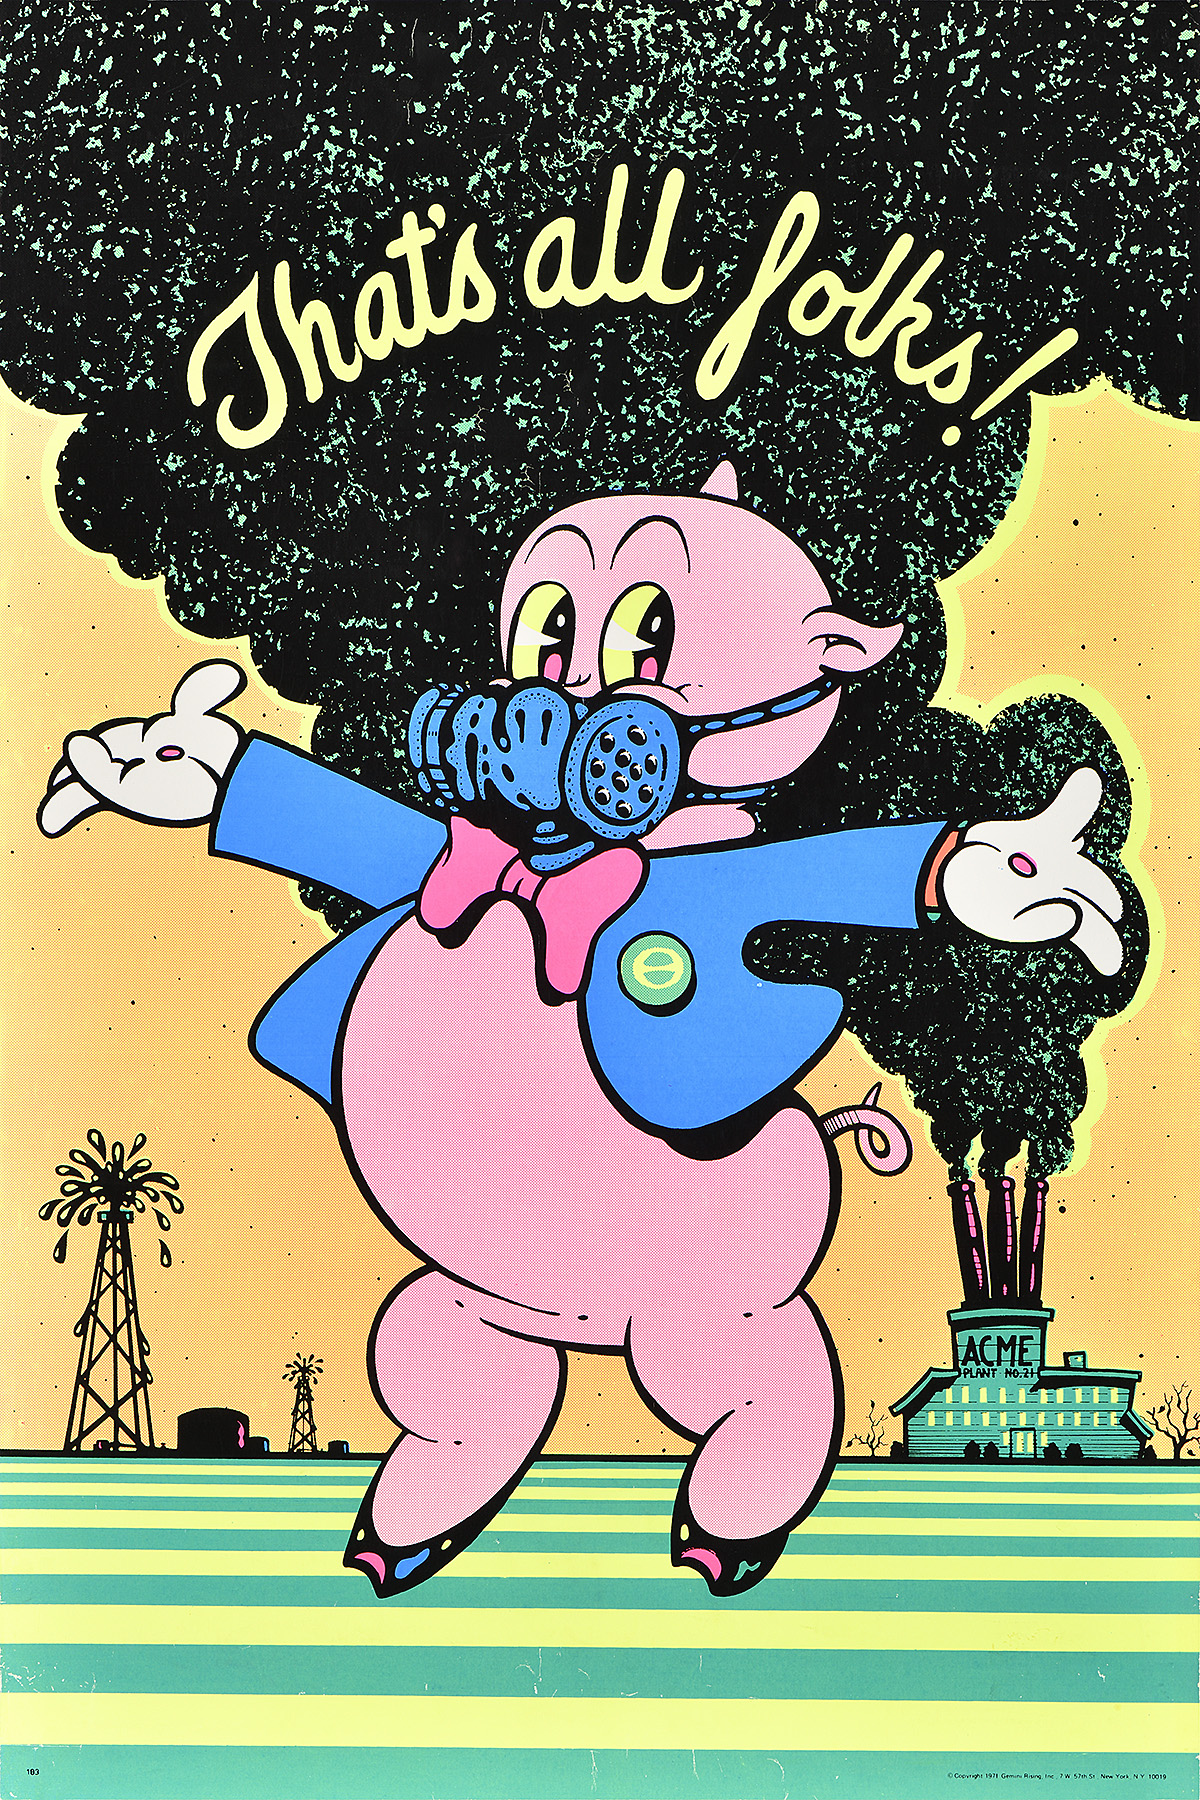 A poster of porky pig wearing a gas mask.